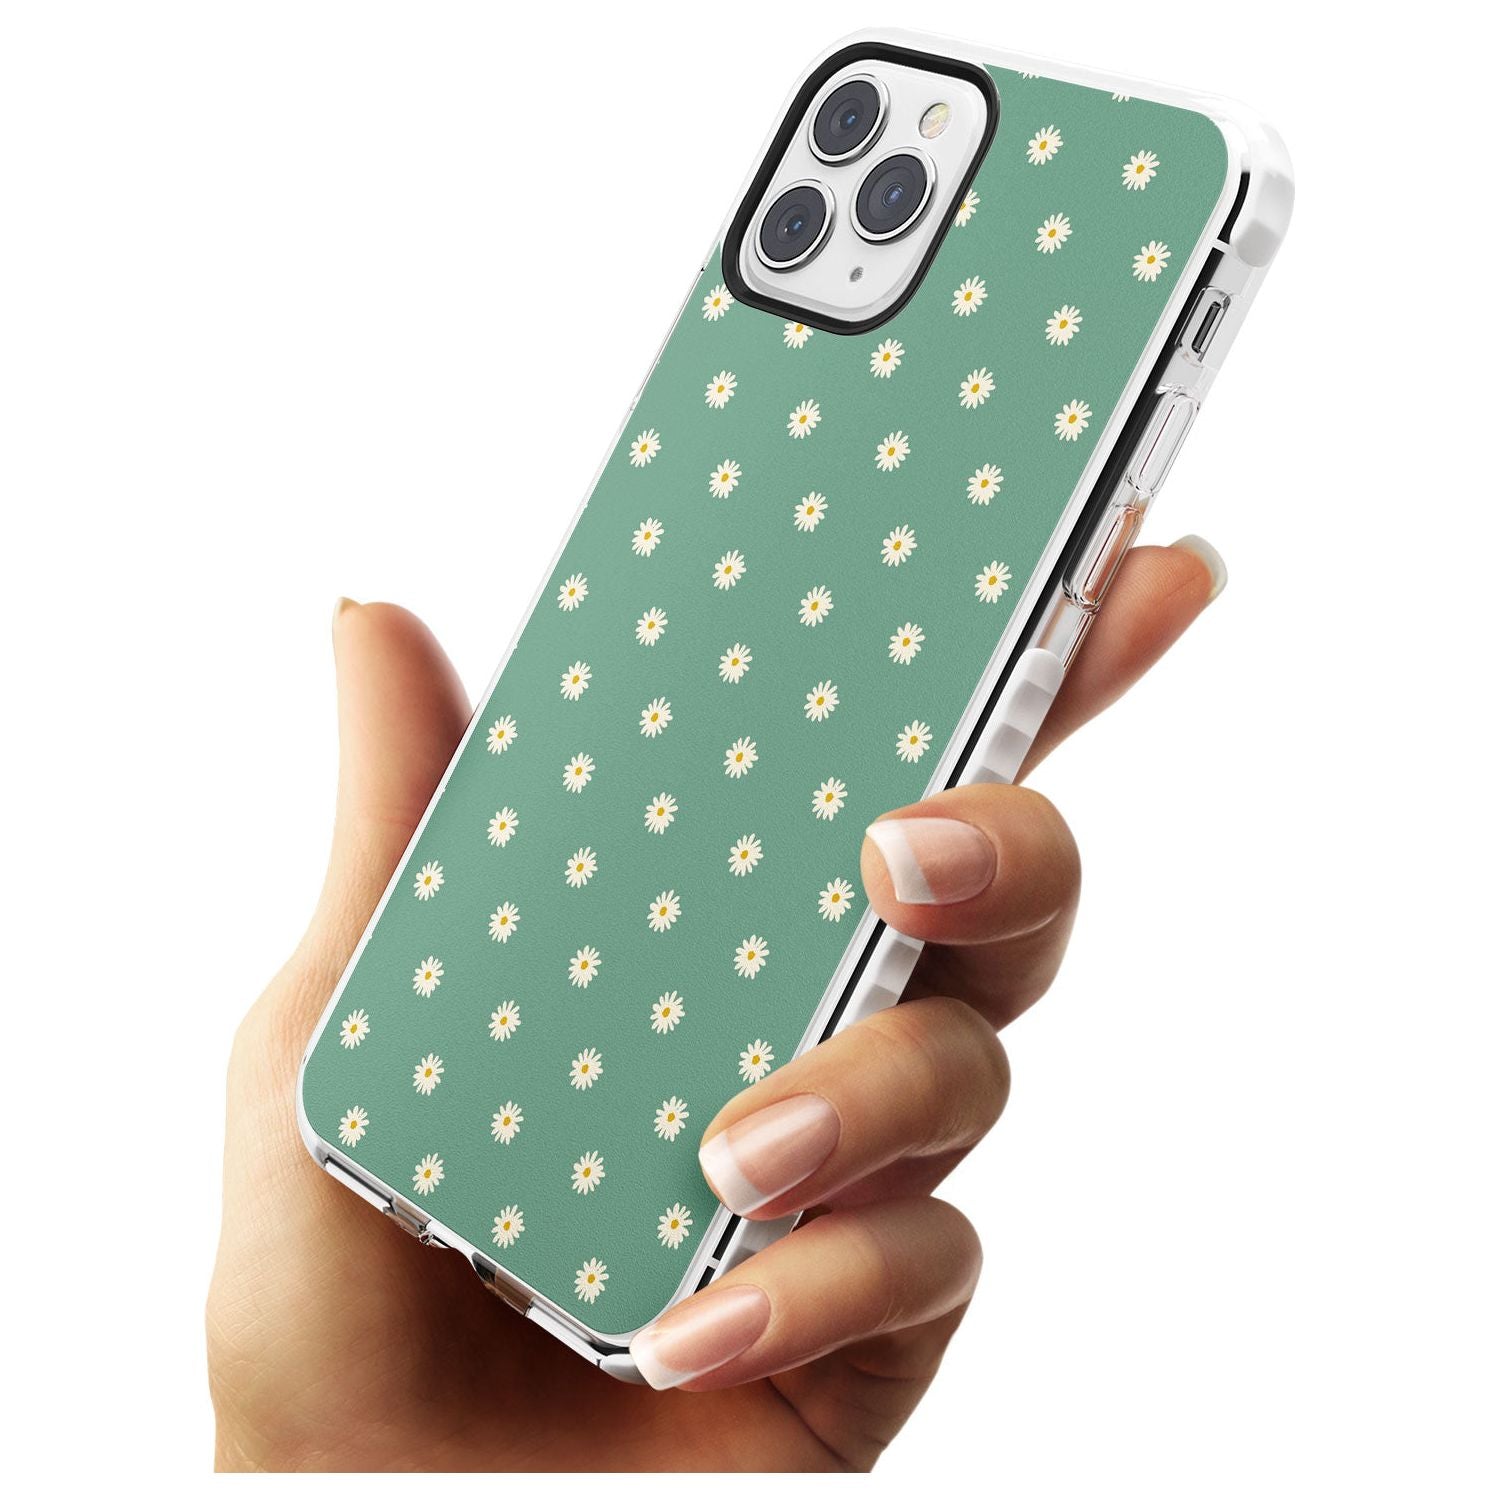 Daisy Pattern - Teal Cute Floral Daisy Design Slim TPU Phone Case for iPhone 11 Pro Max